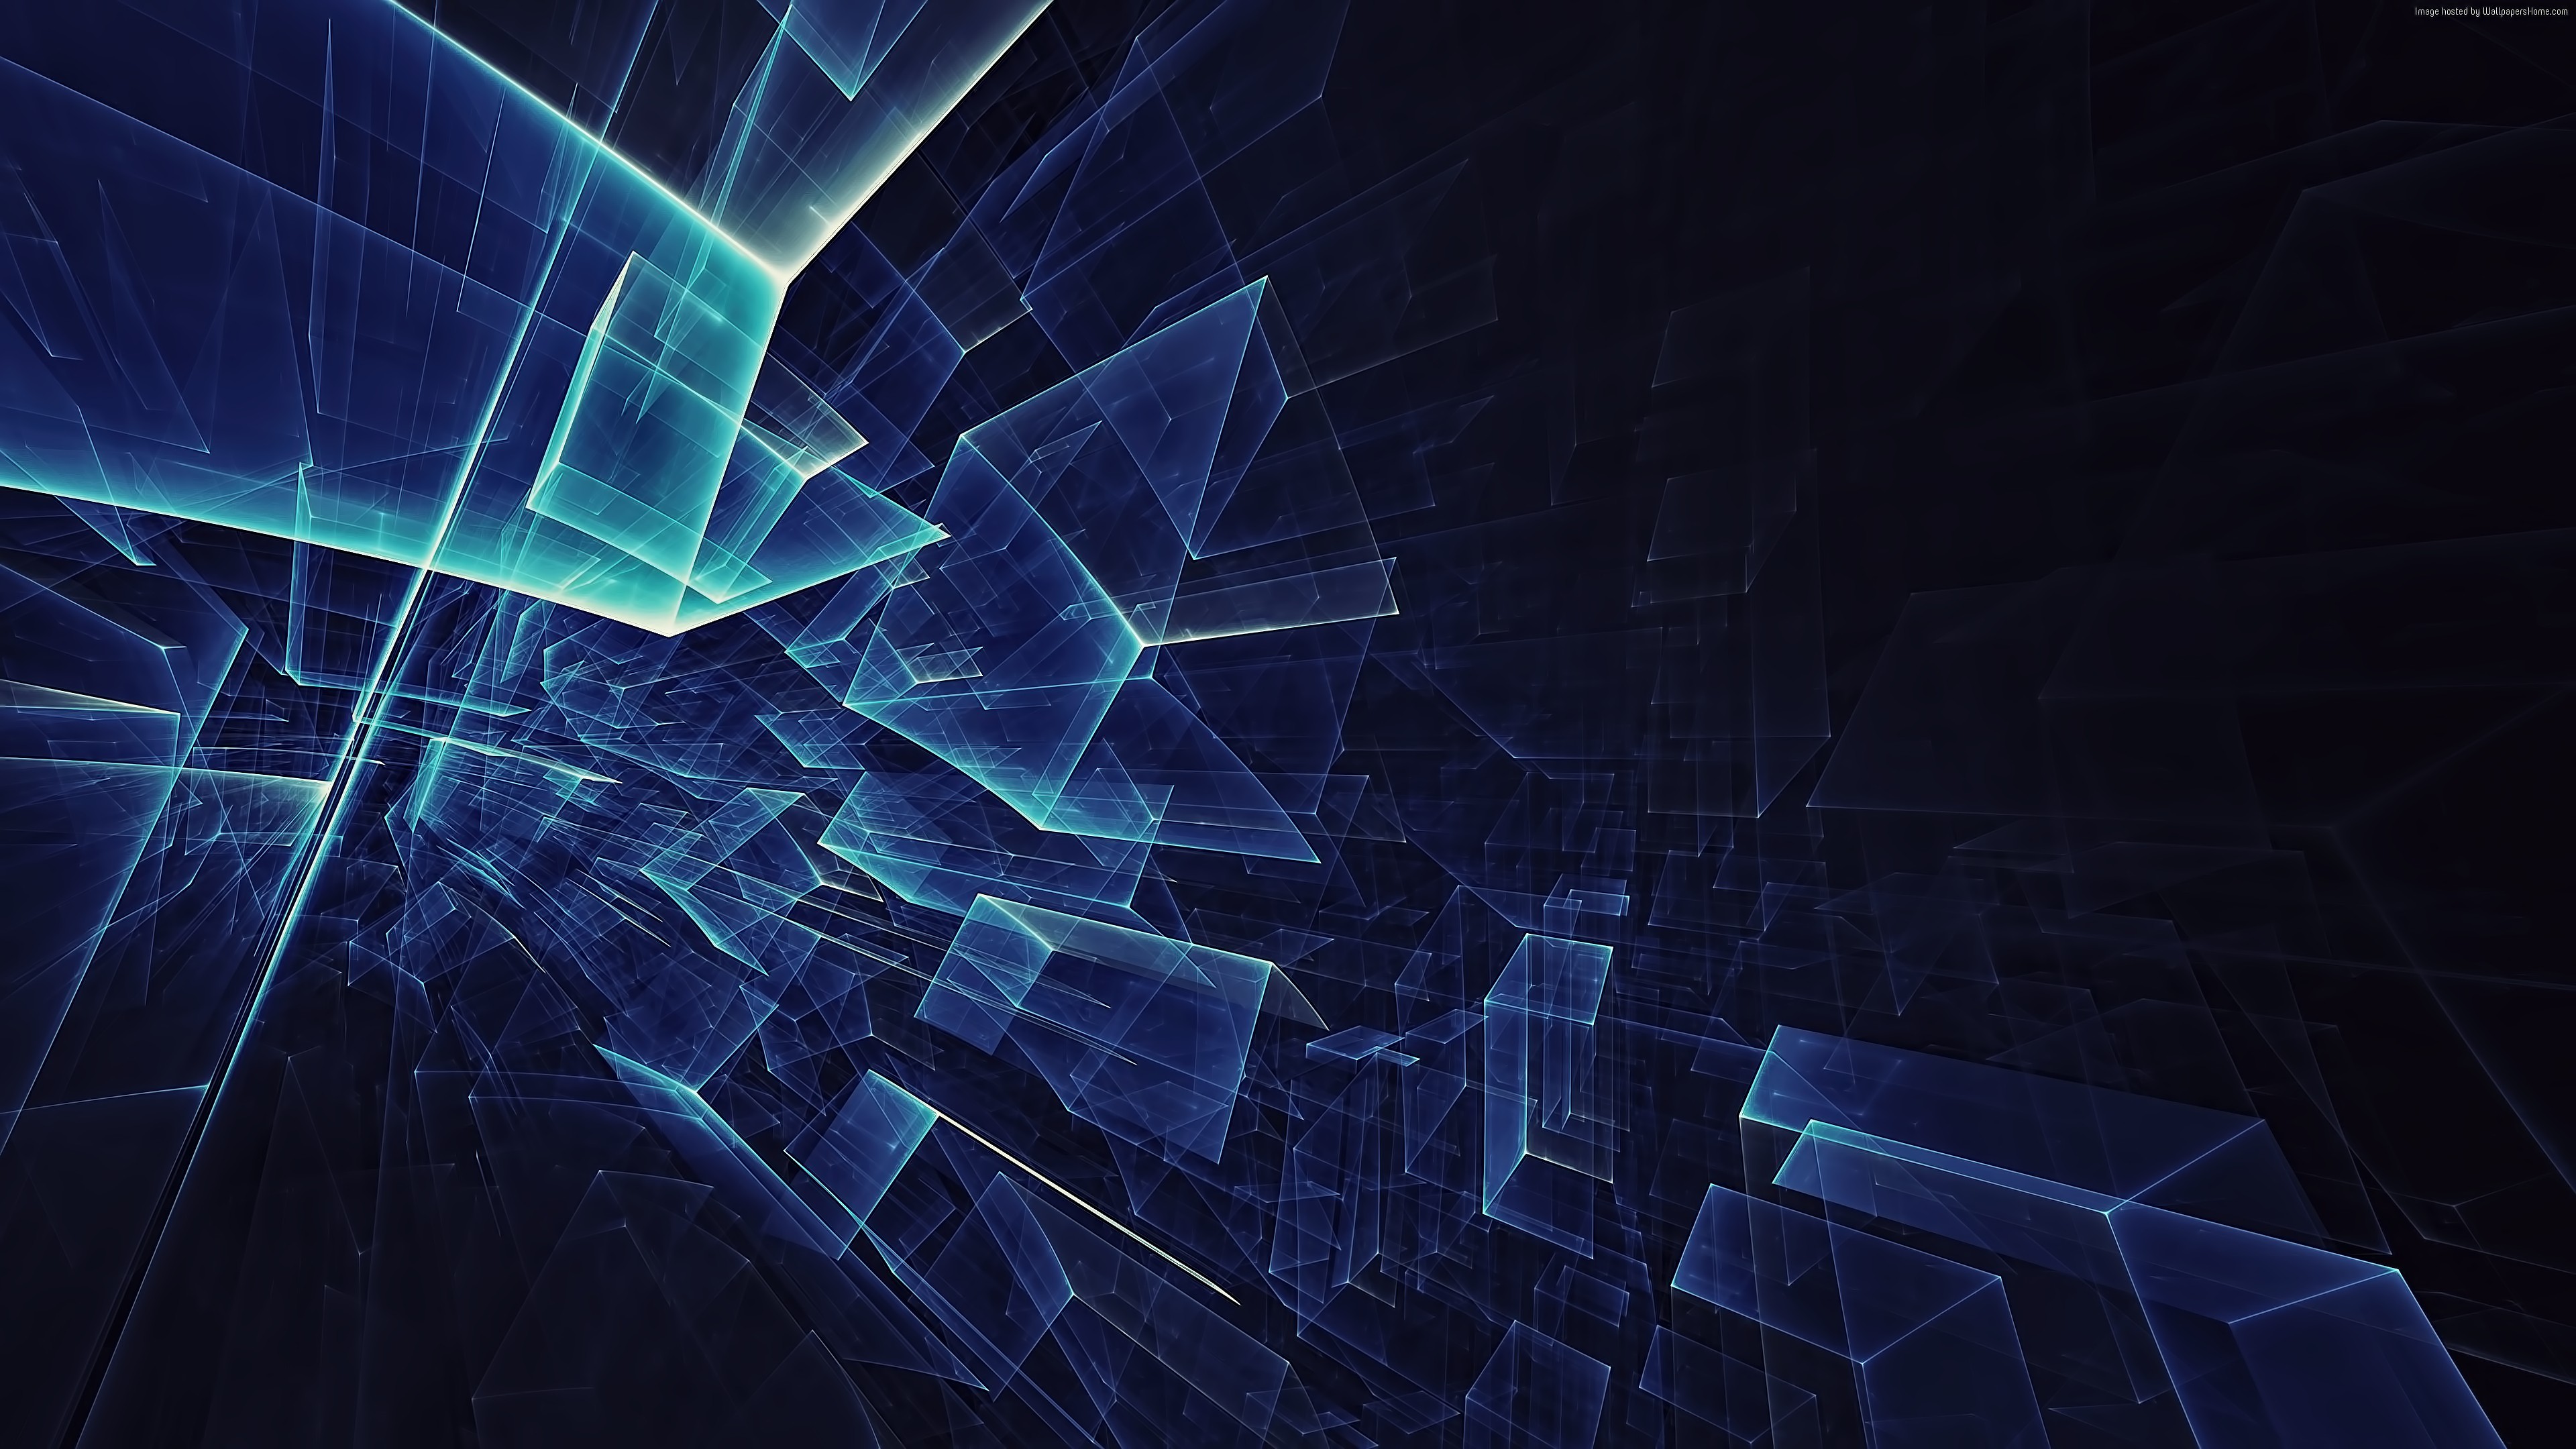 4K Squares Abstract Art Wallpapers